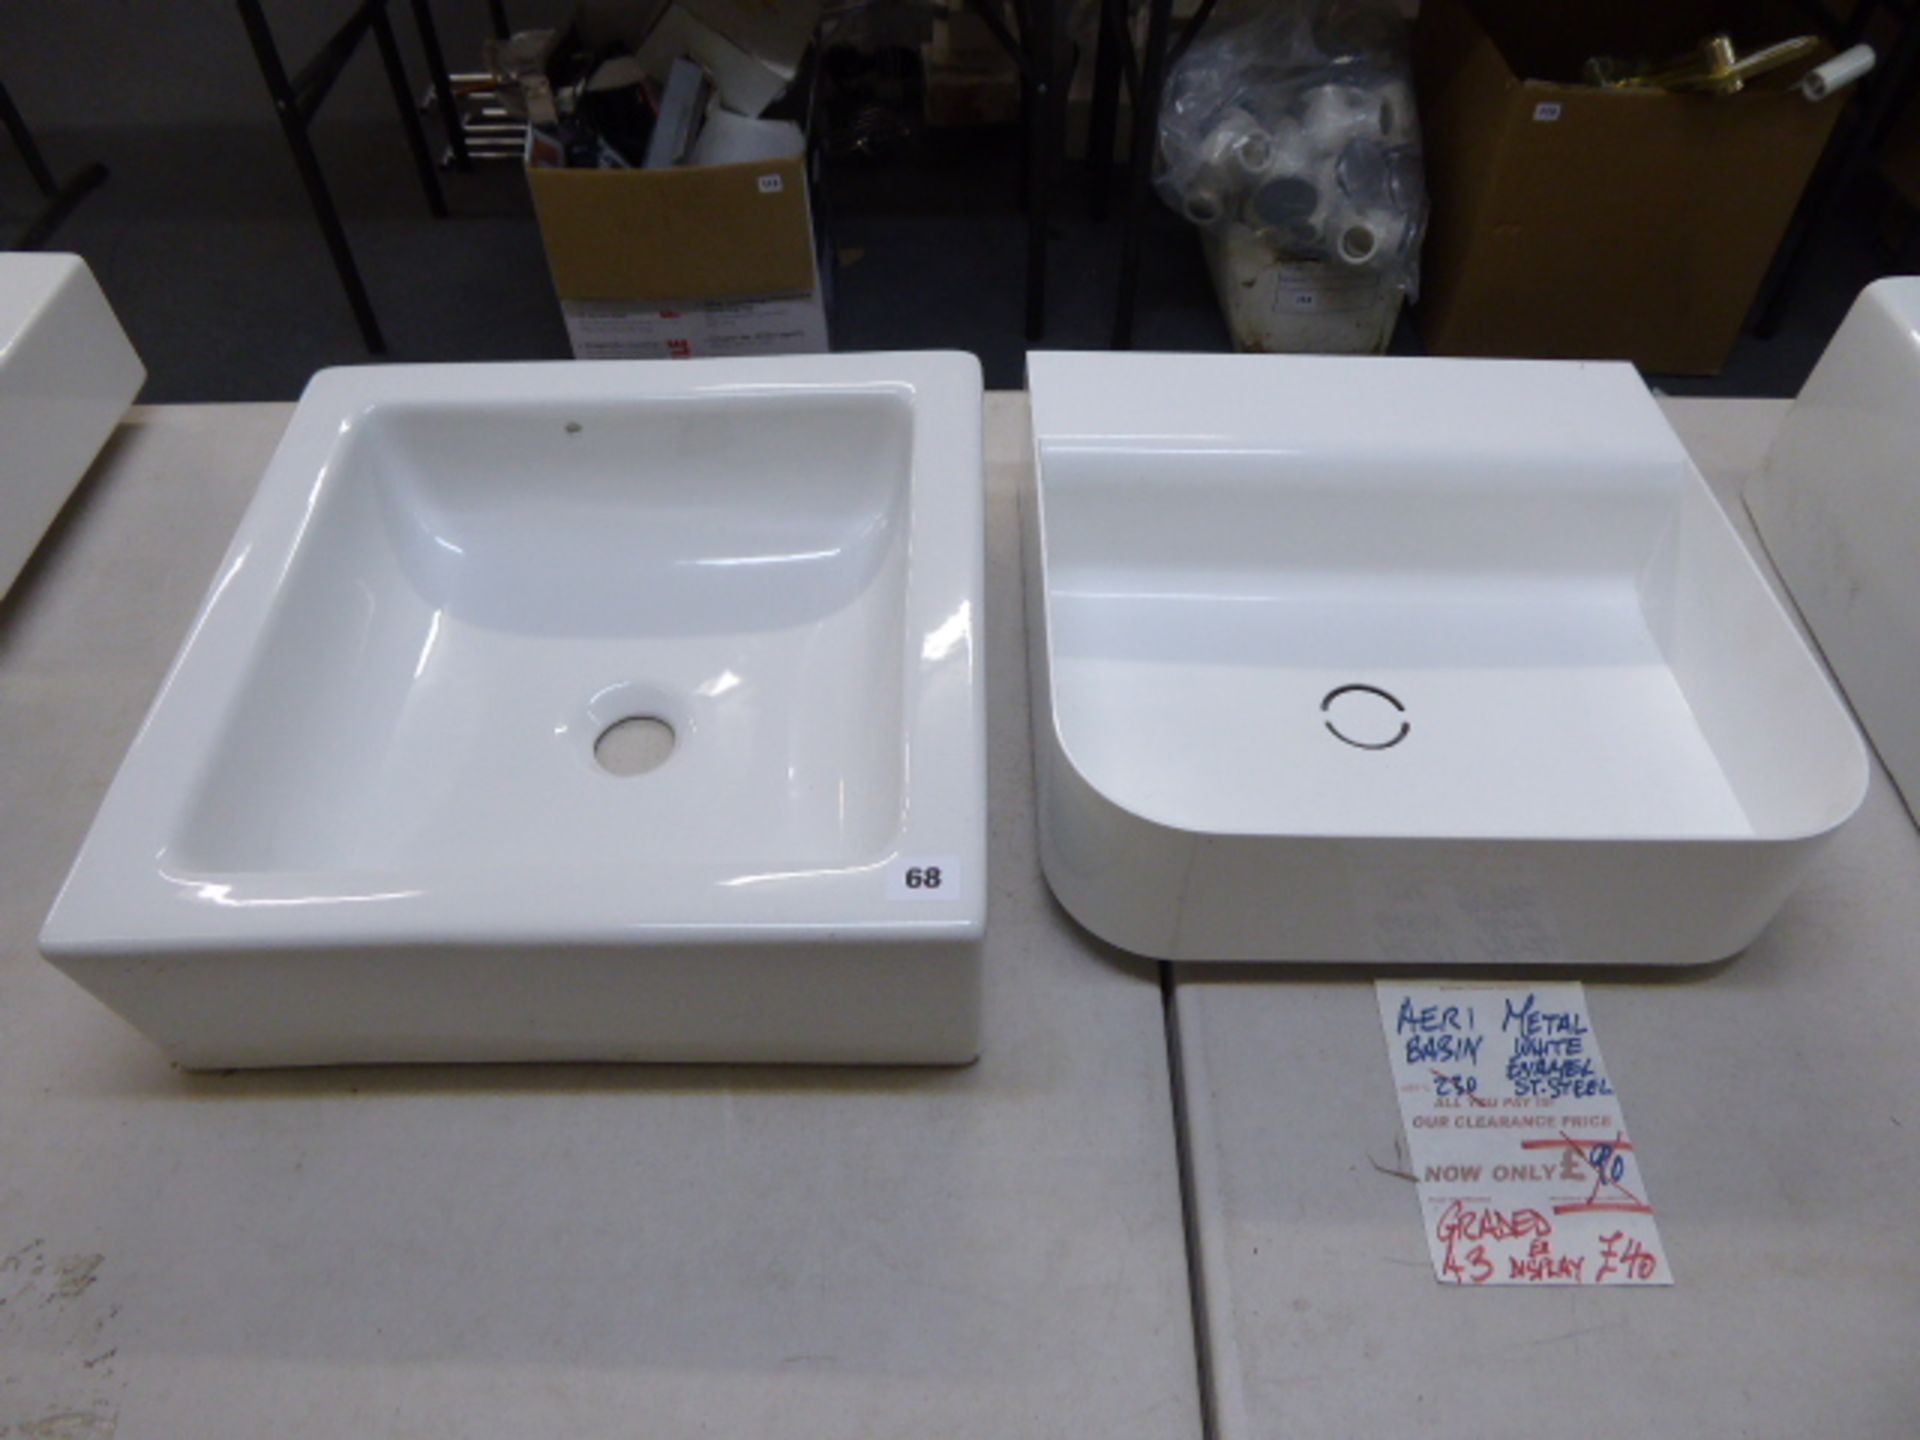 Aeri metal enamel stainless steel hand basin and a square white ceramic basin